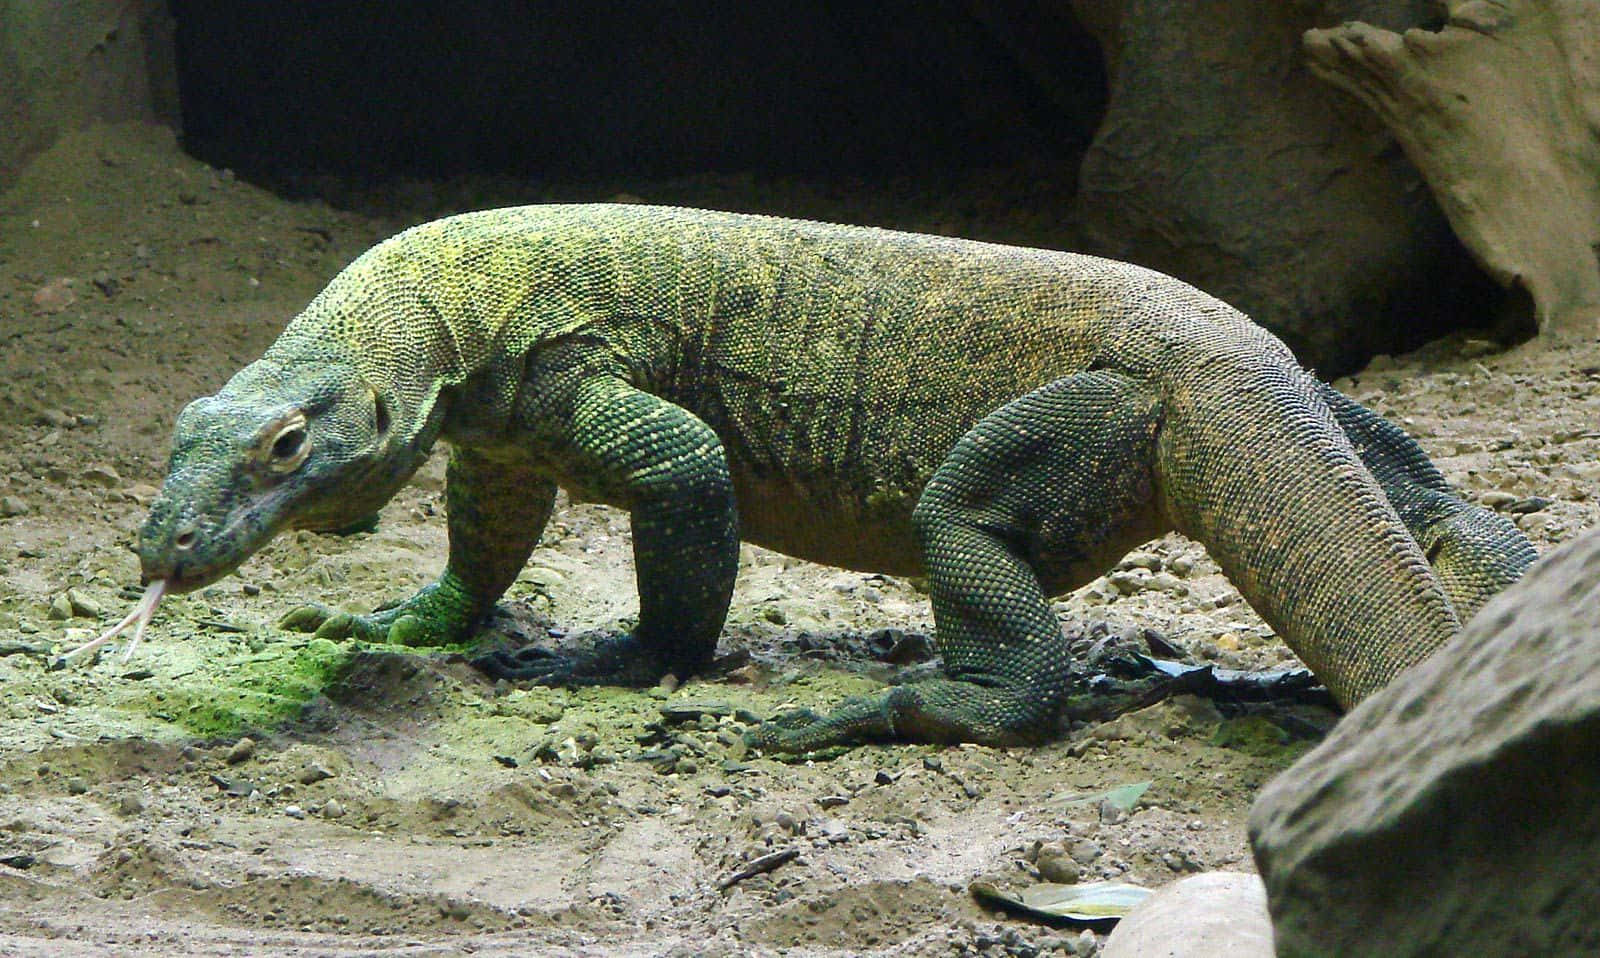 A Komodo Dragon displaying its natural camouflage in the wild